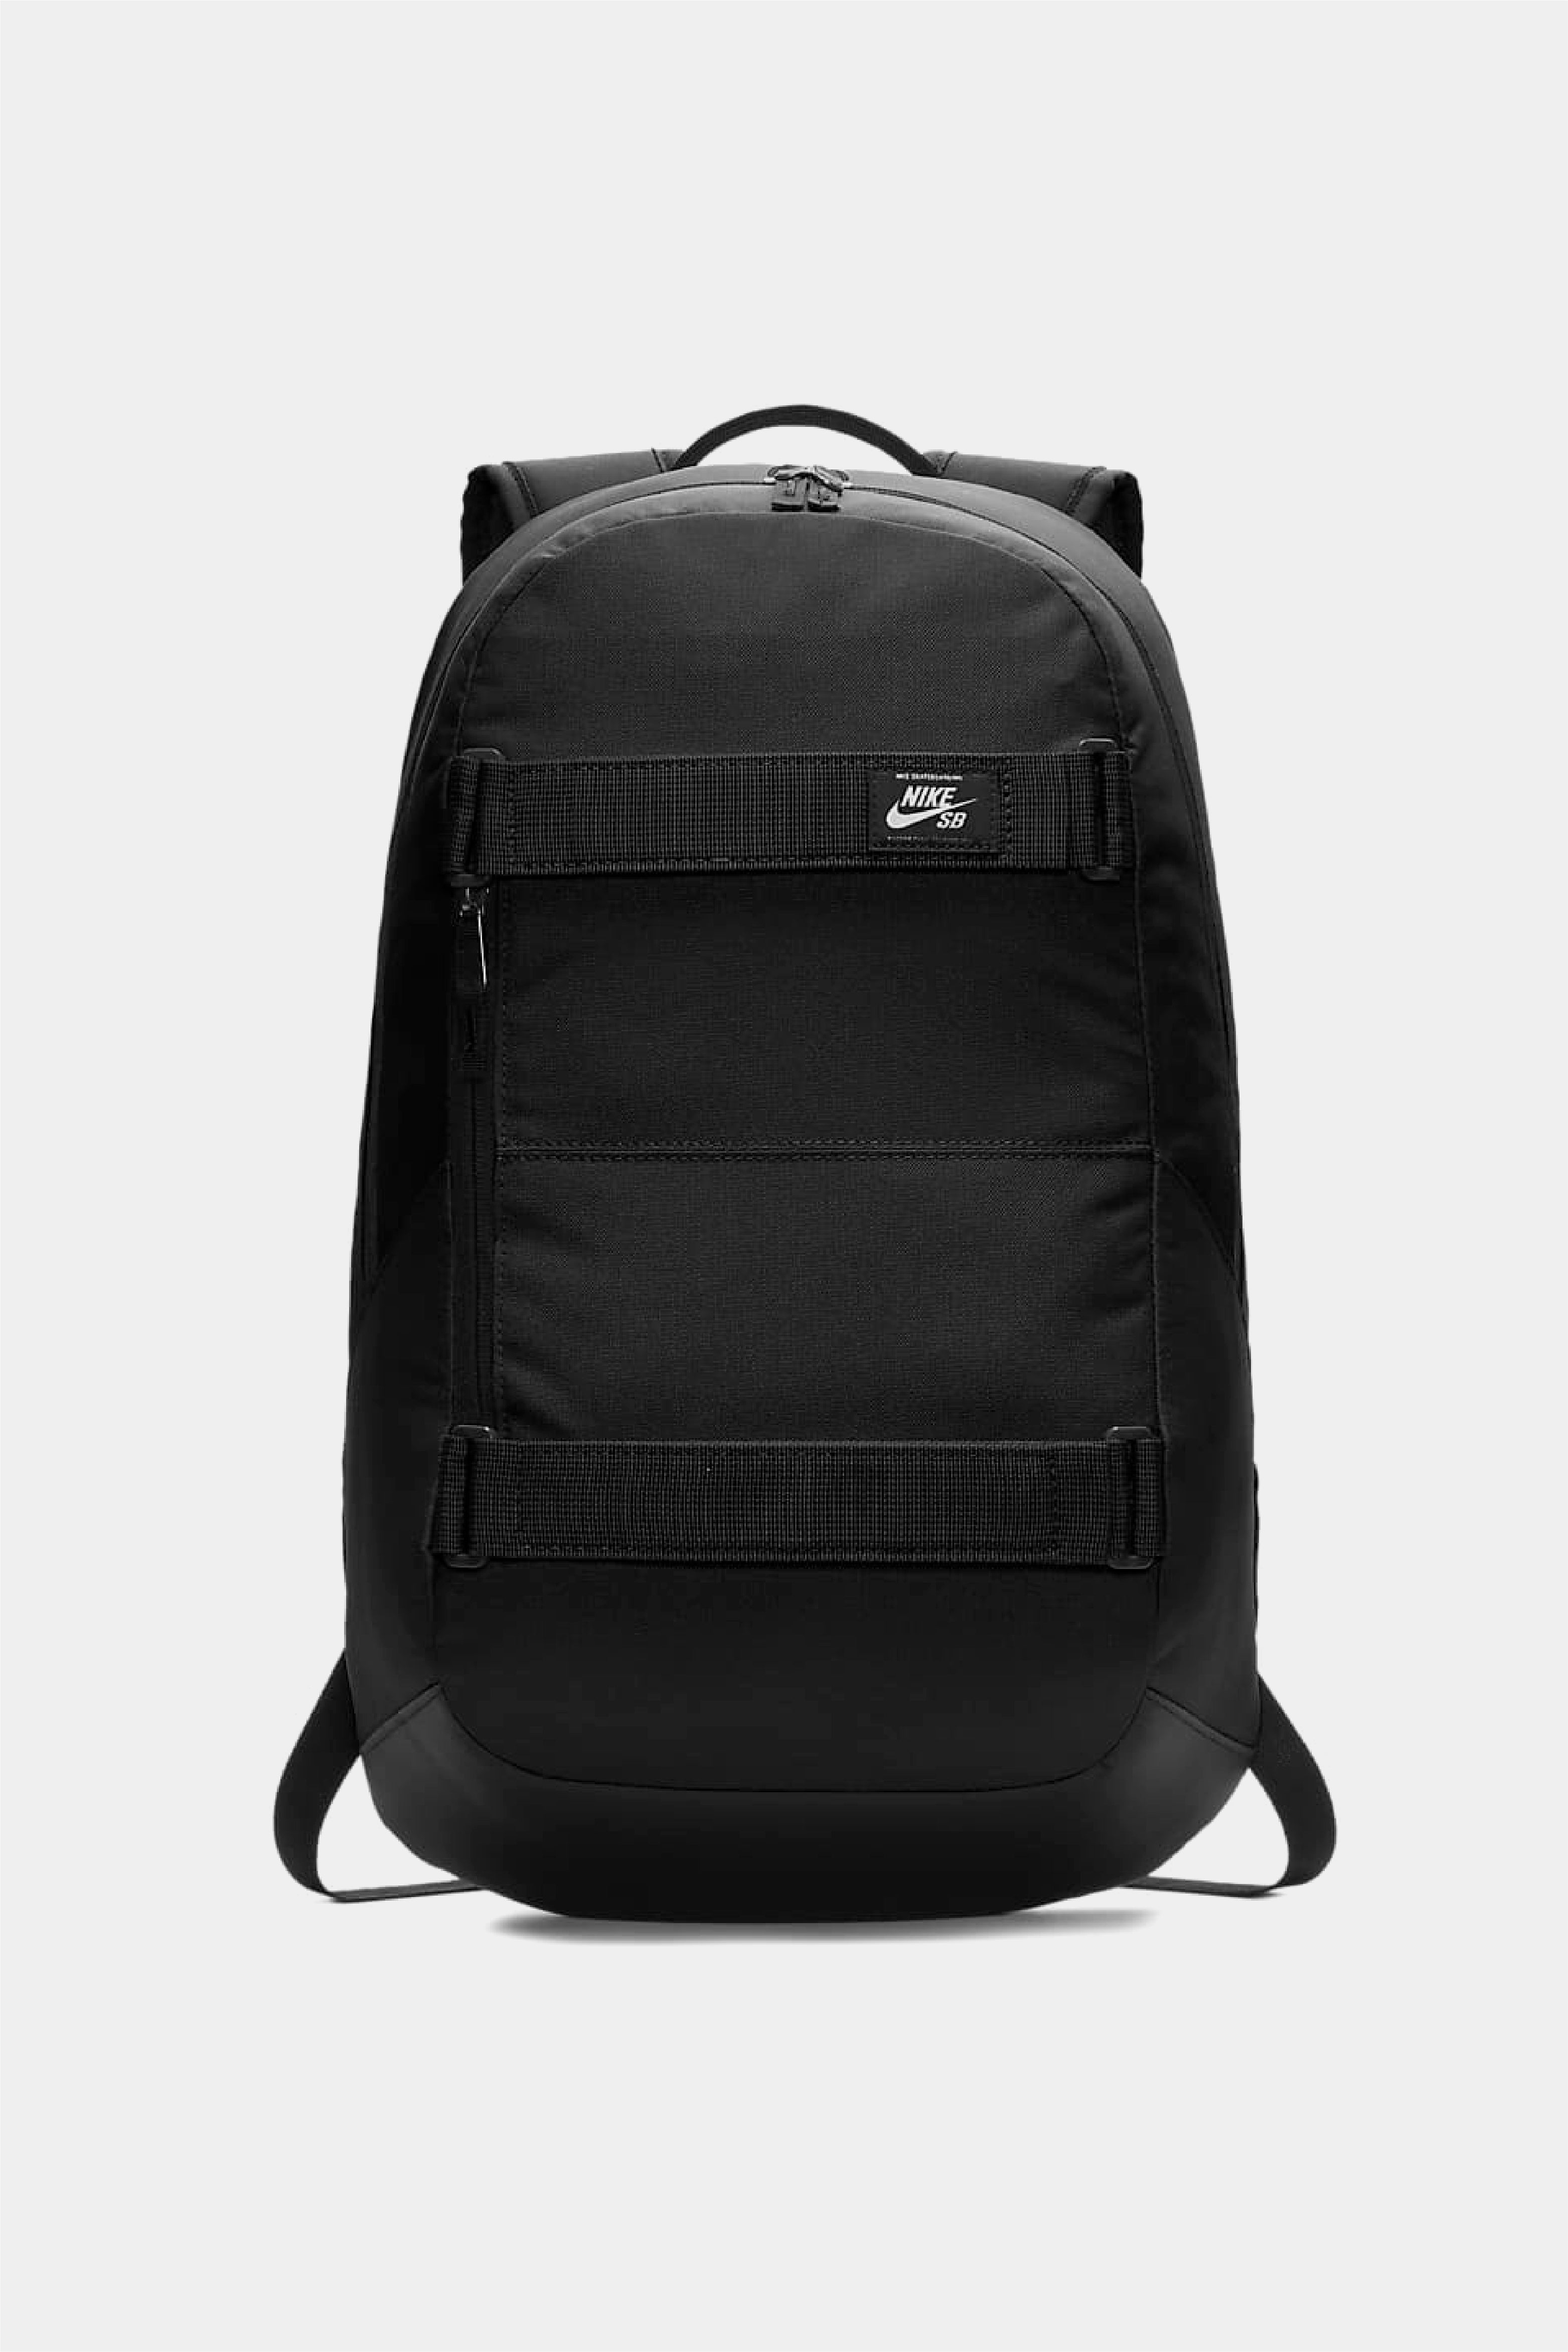 Selectshop FRAME - NIKE SB Courthouse Backpack All-Accessories Concept Store Dubai